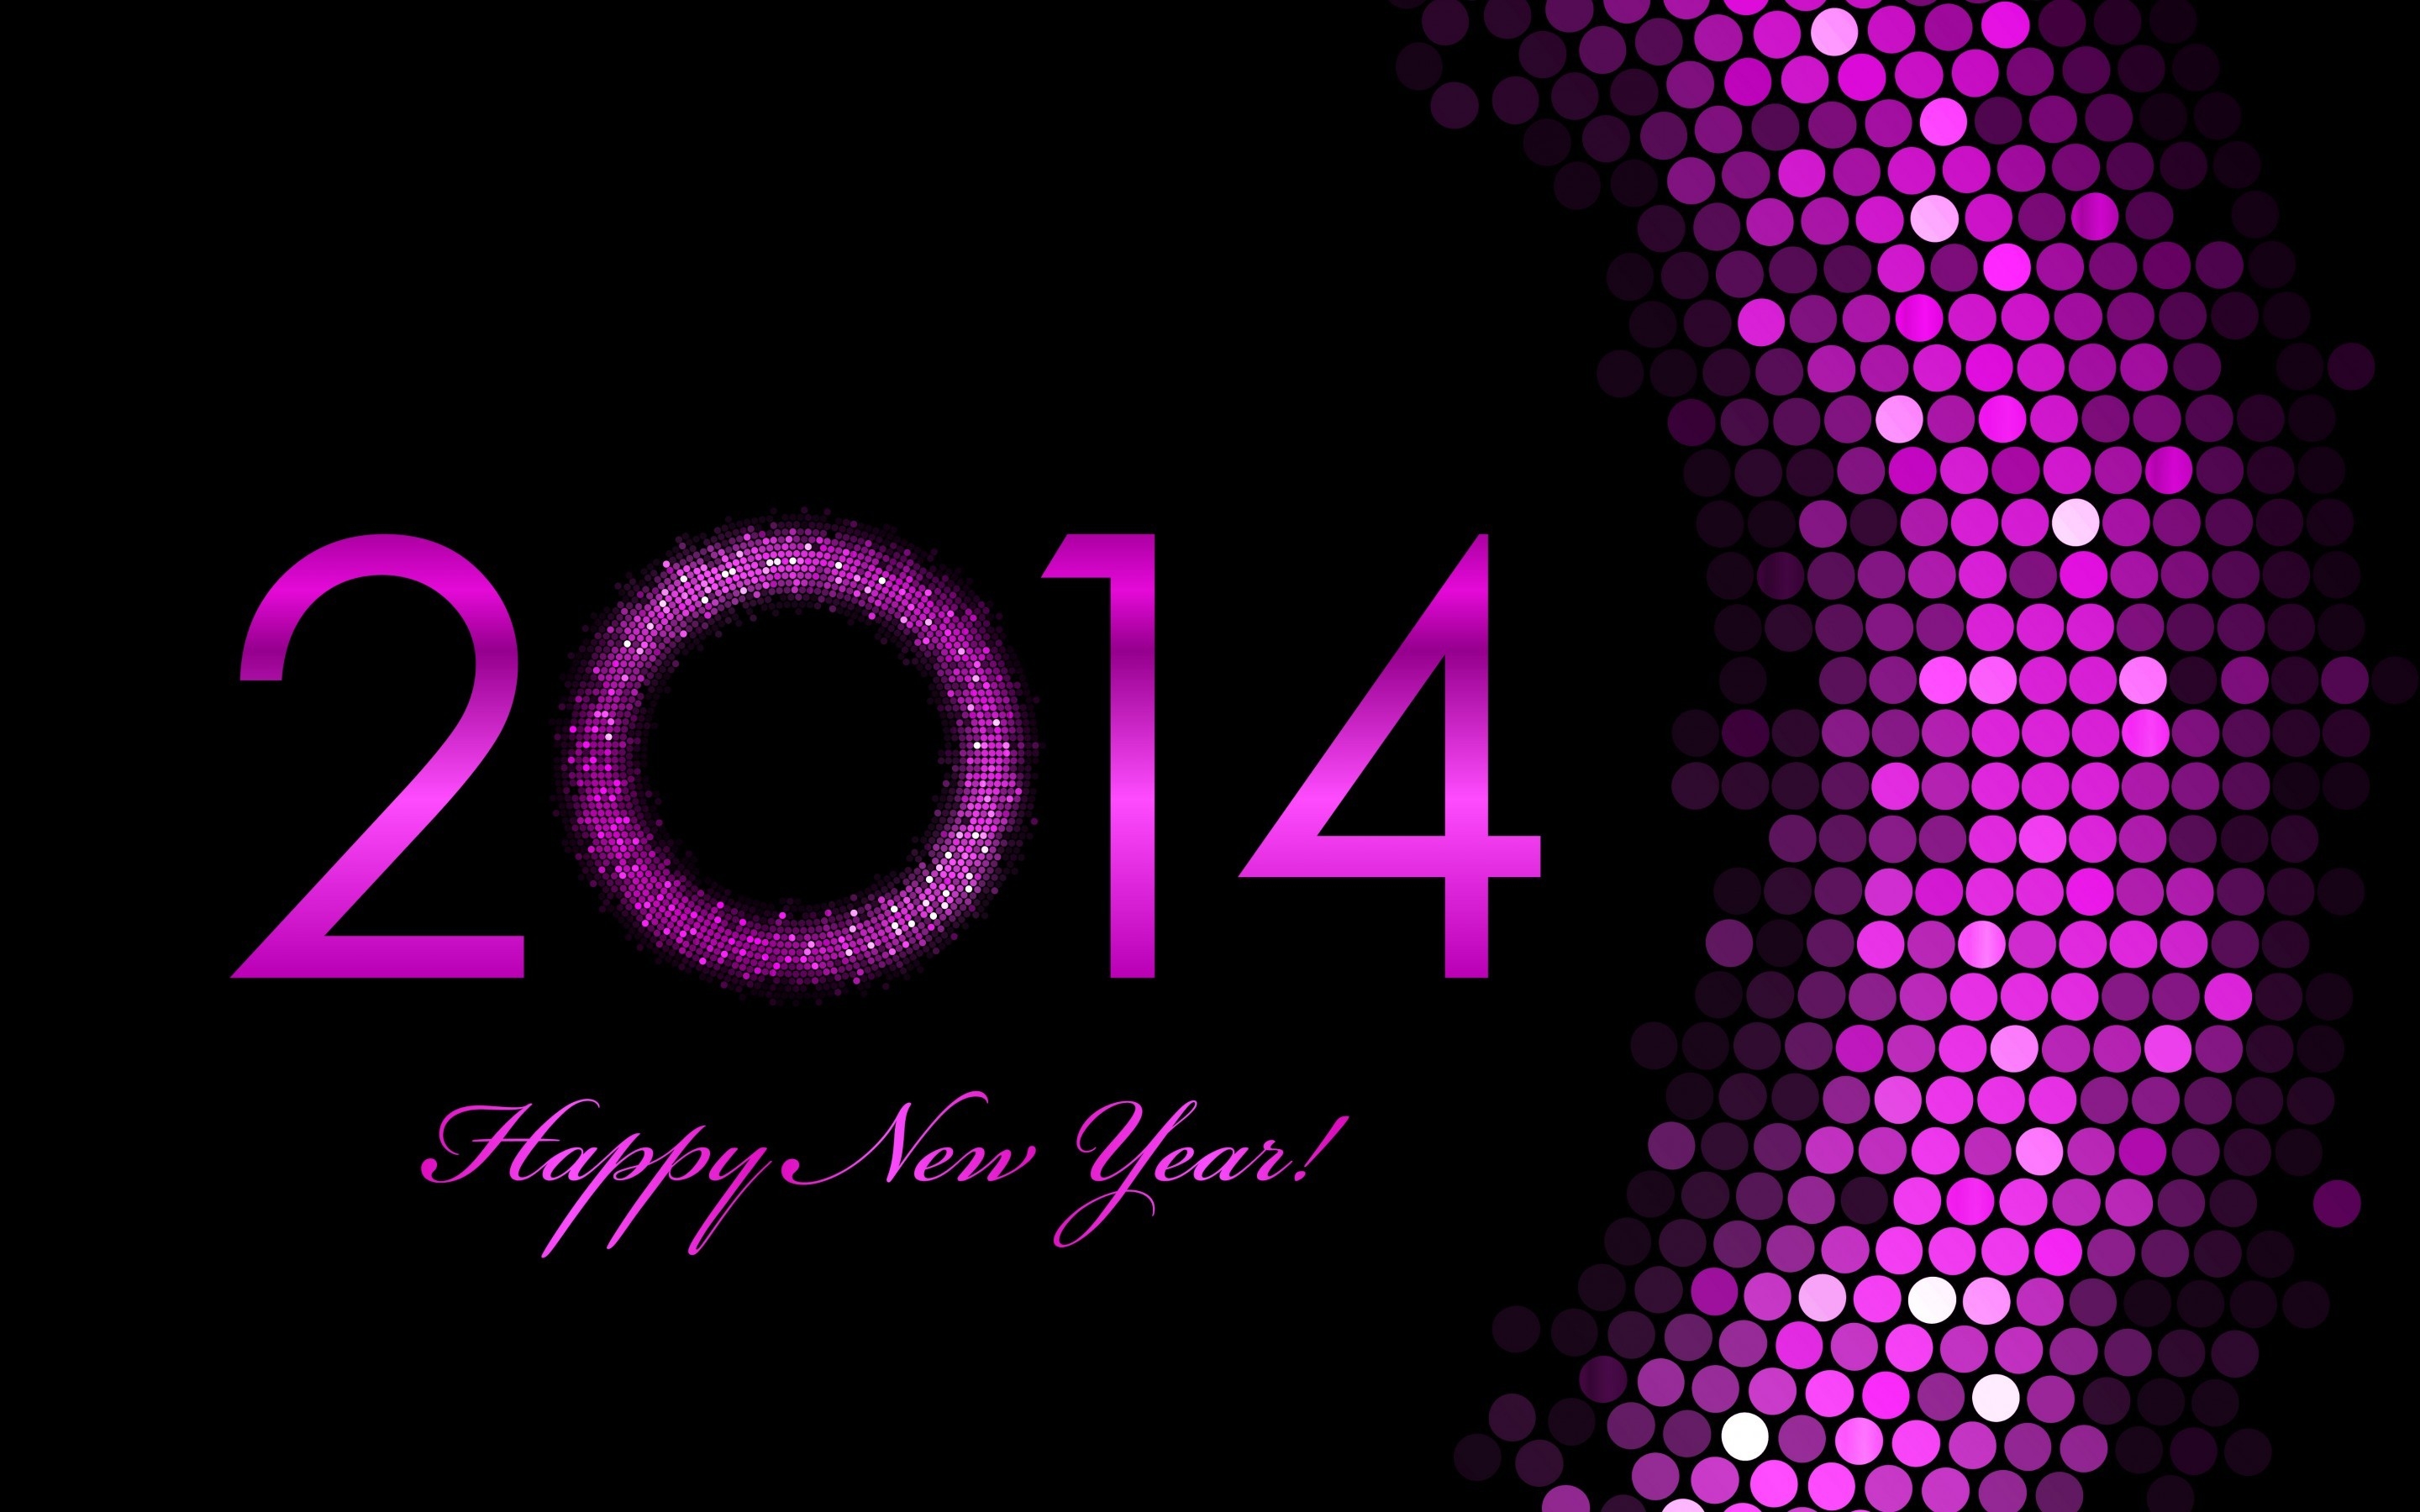 2014 Happy New Year for 2880 x 1800 Retina Display resolution